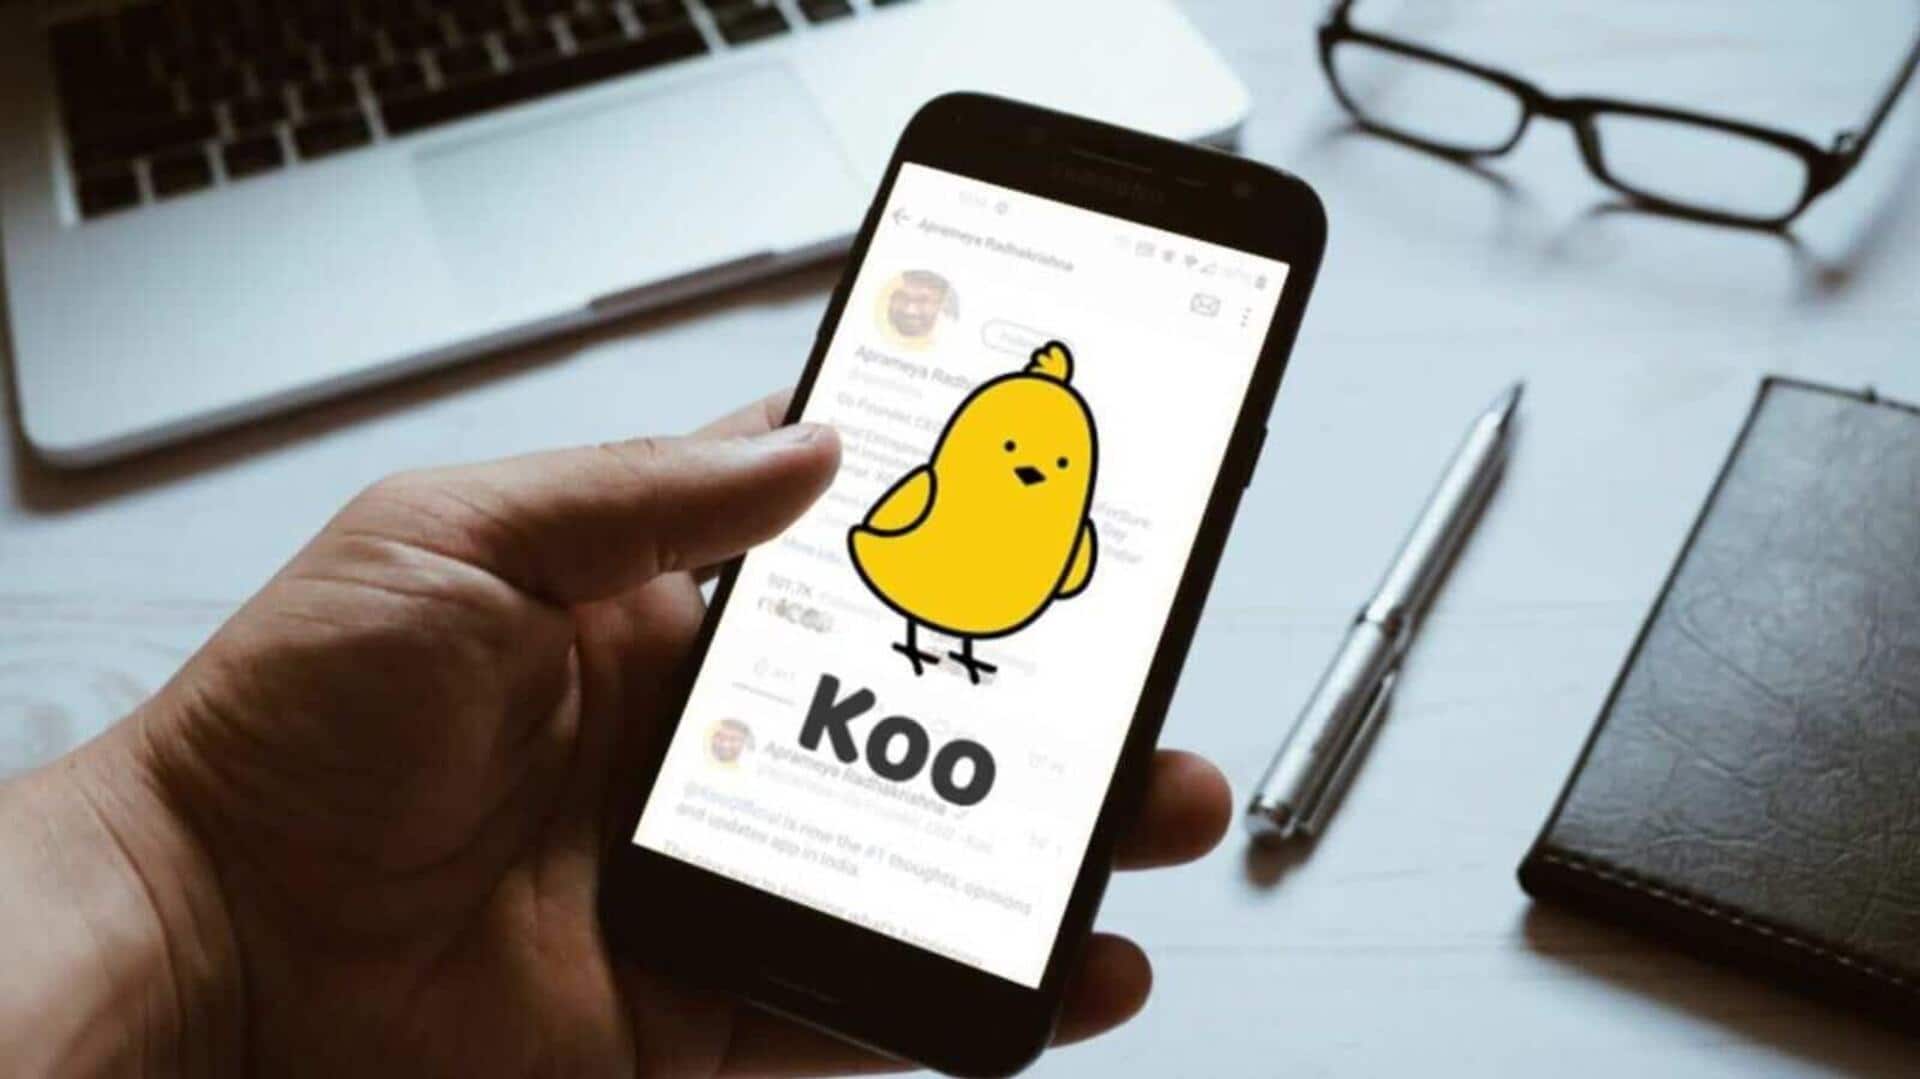 Dailyhunt in talks to acquire Indian social network Koo